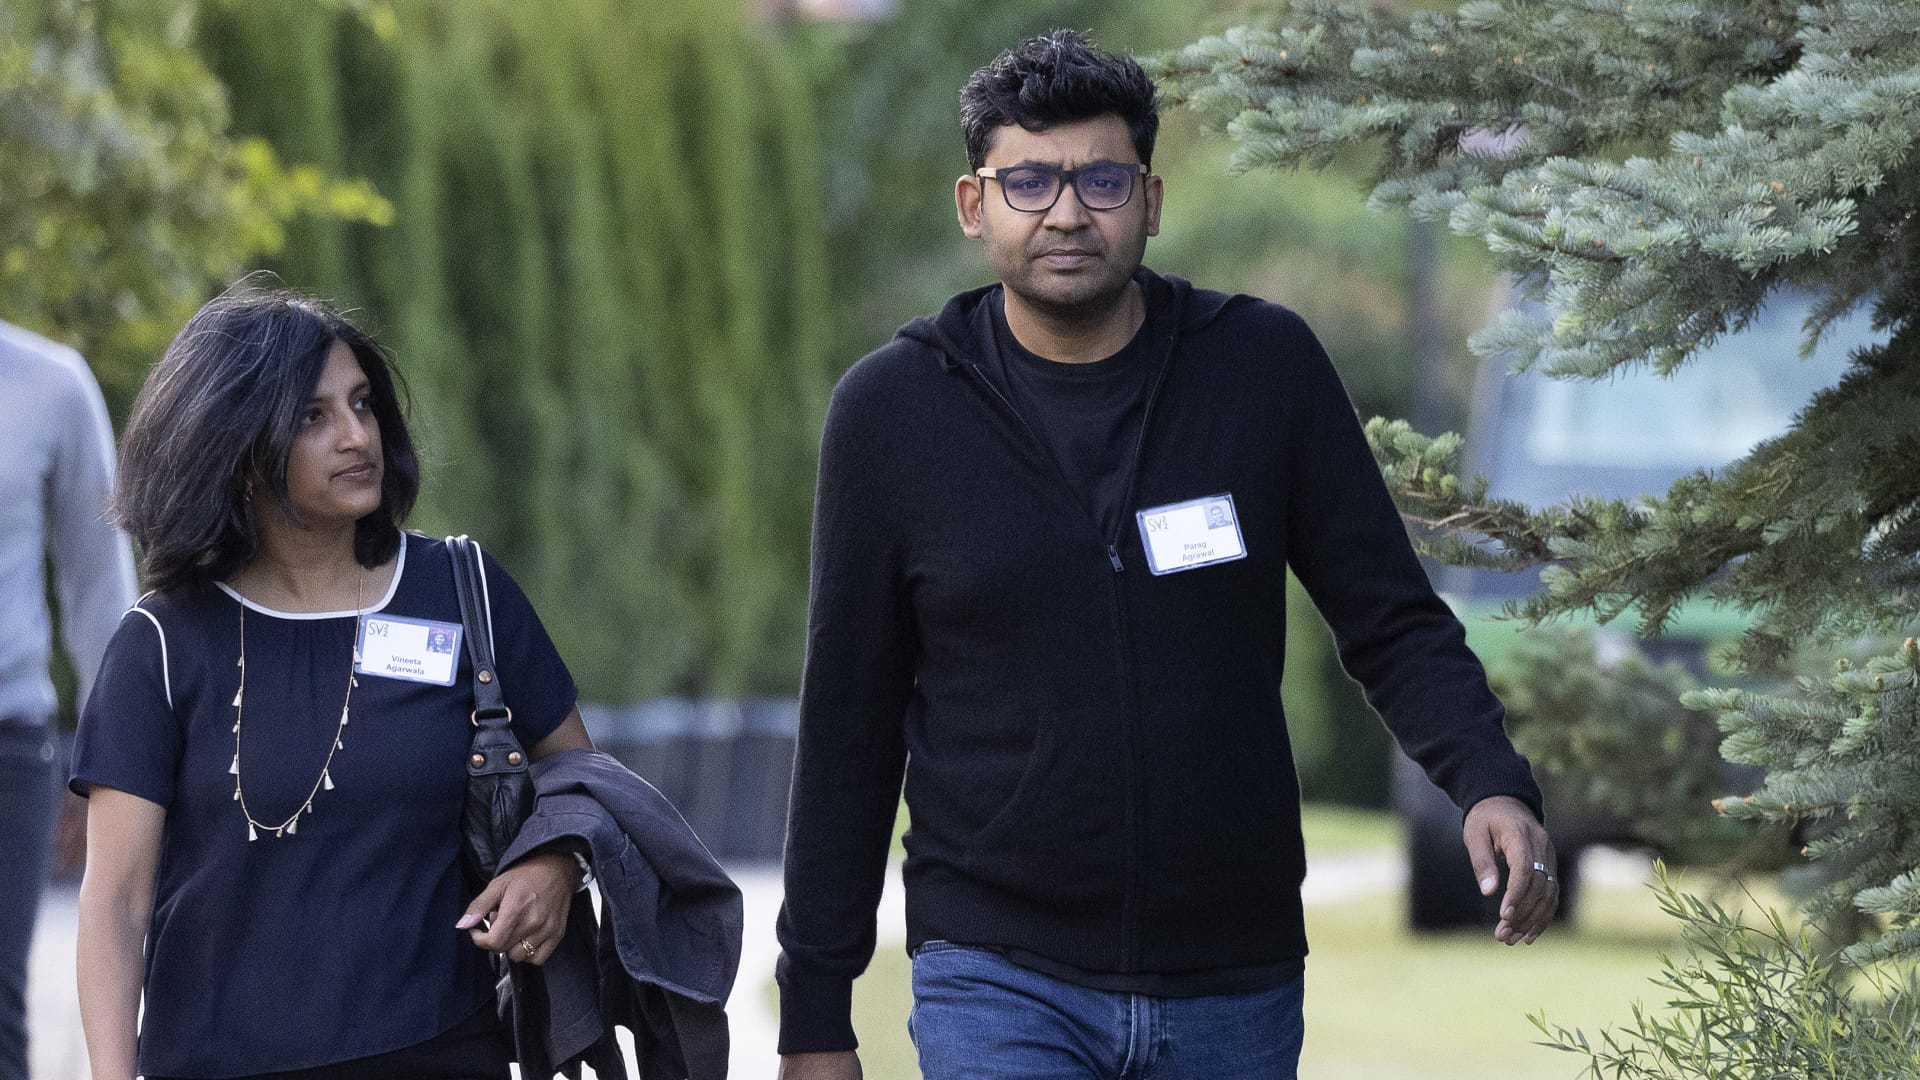 Parag Agrawal, CEO of Twitter, and his wife Vineeta Agarwal, walk to a morning session during the Allen & Company Sun Valley Conference on July 07, 2022 in Sun Valley, Idaho.